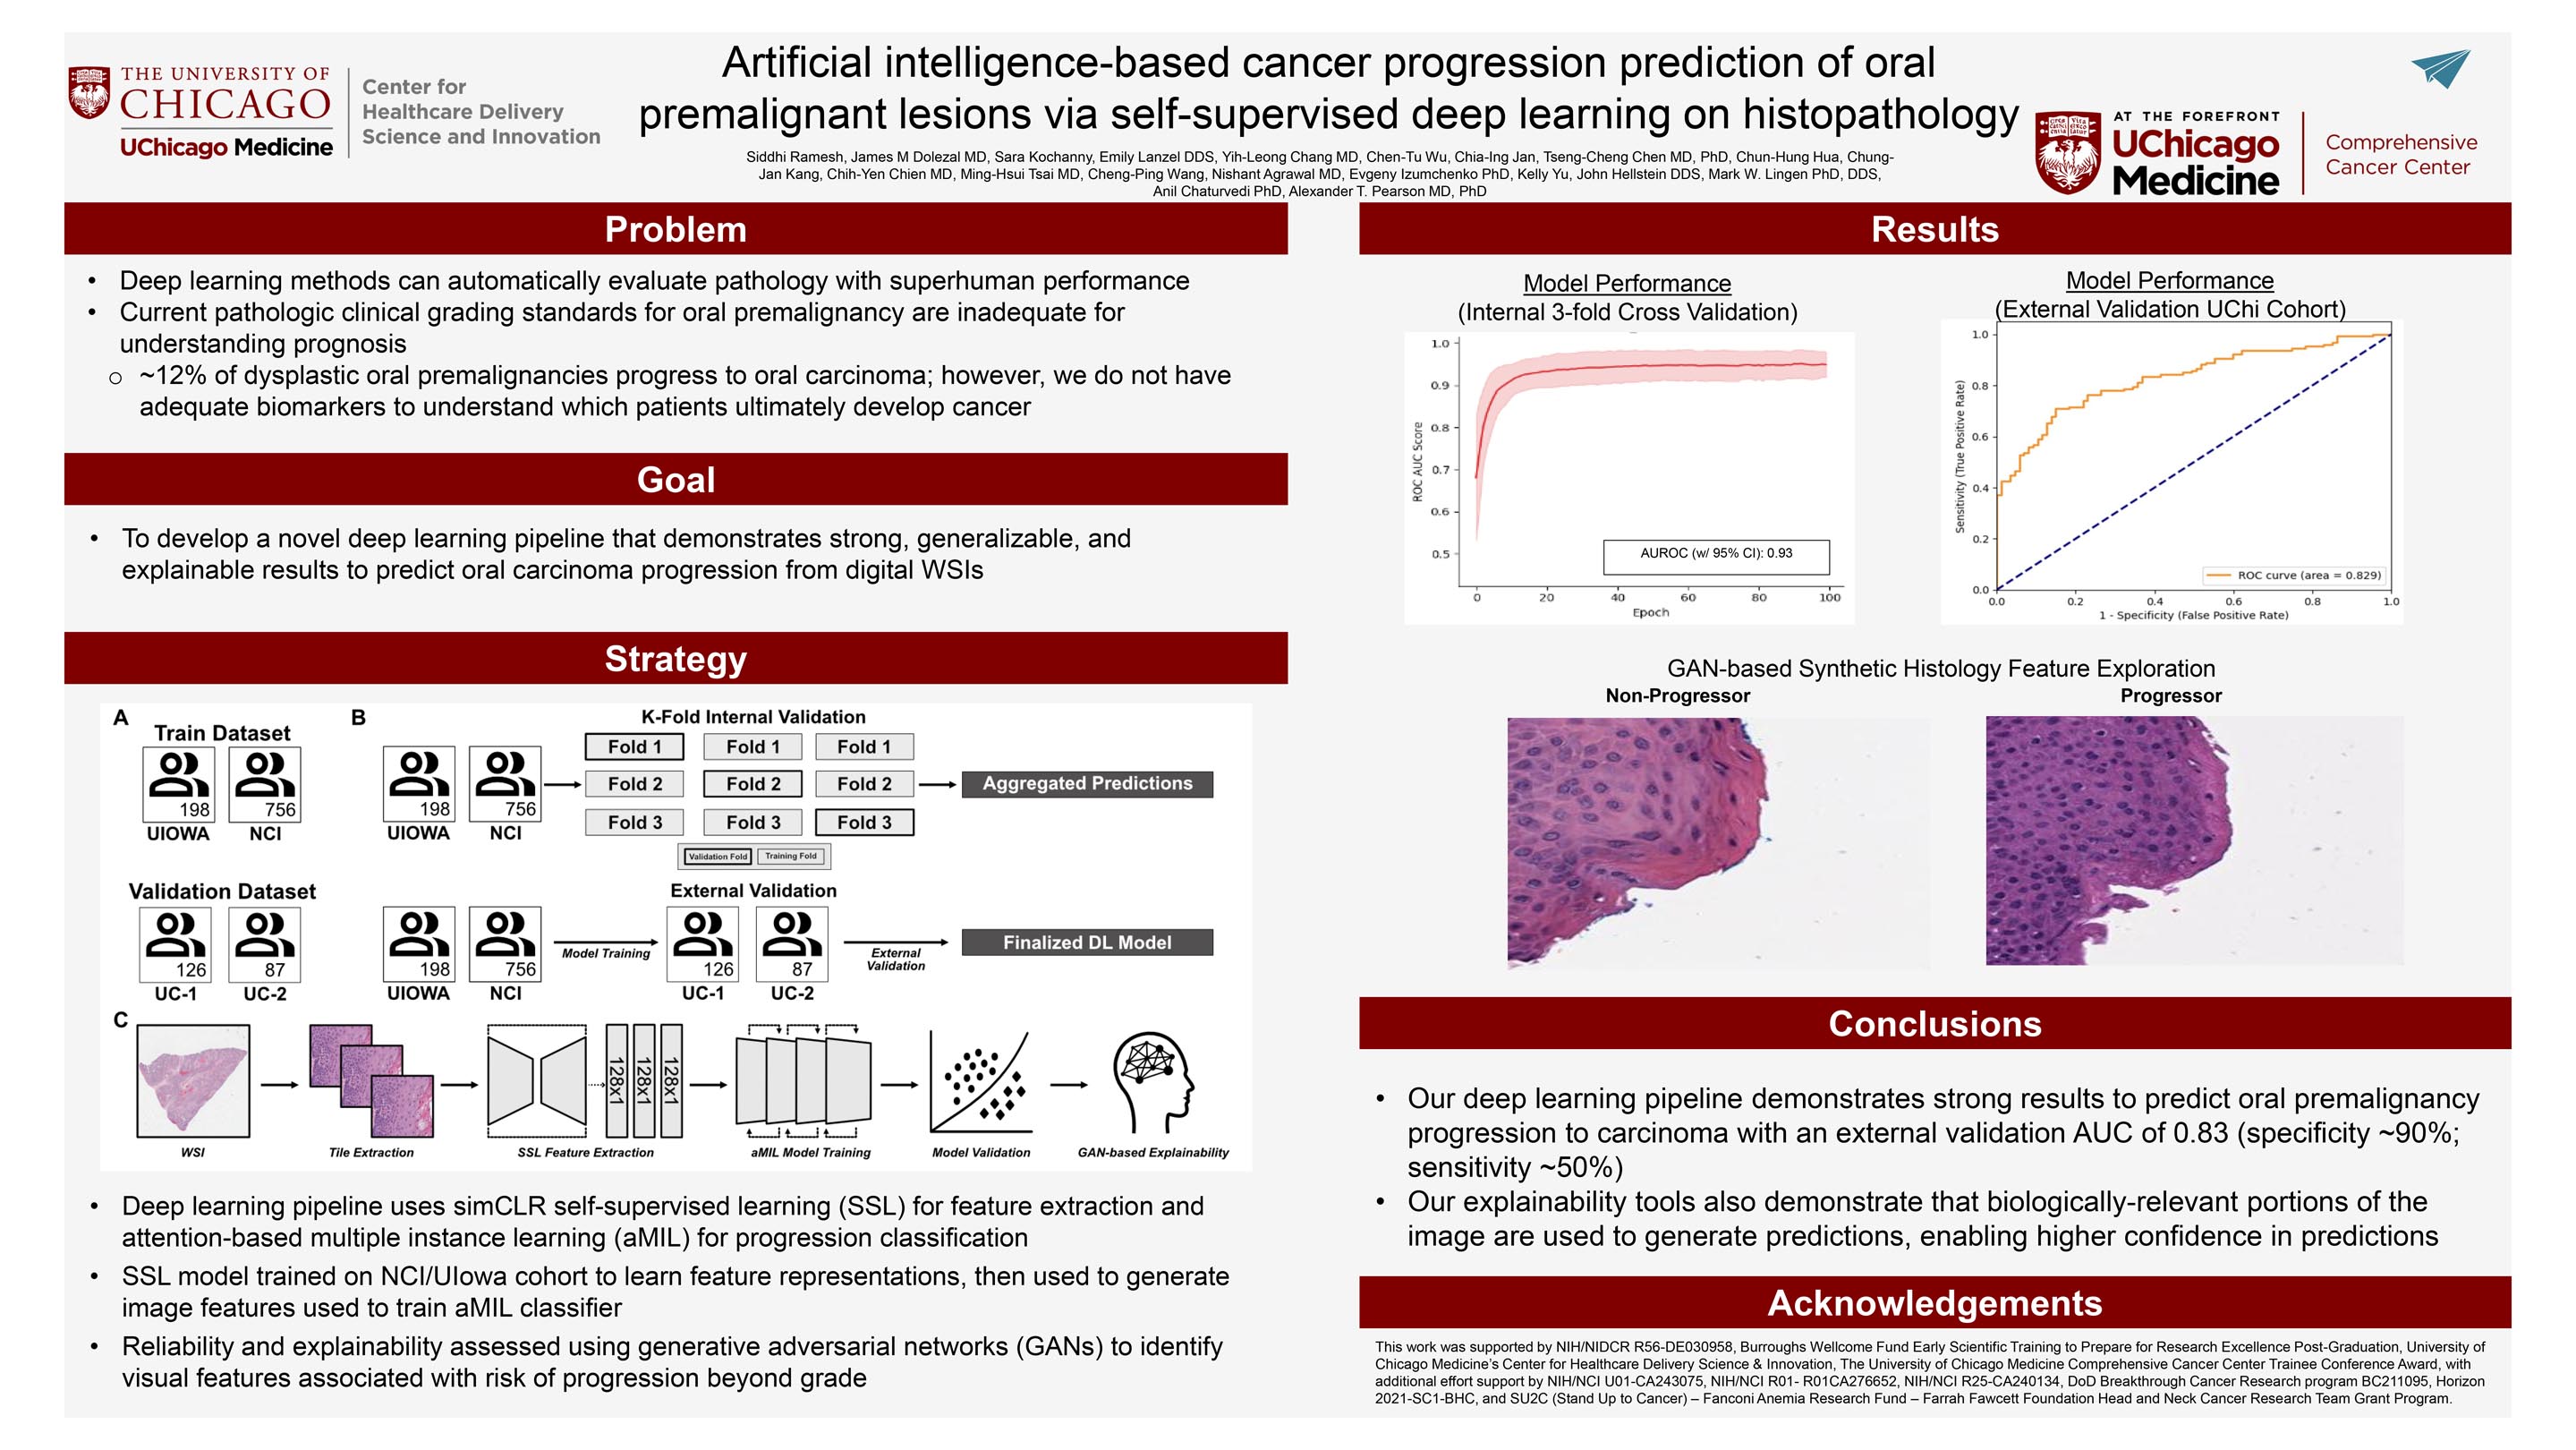 RAMESH_Artificial intelligence-based cancer progression prediction of oral premalignant lesions via self-supervised deep learning on histopathol